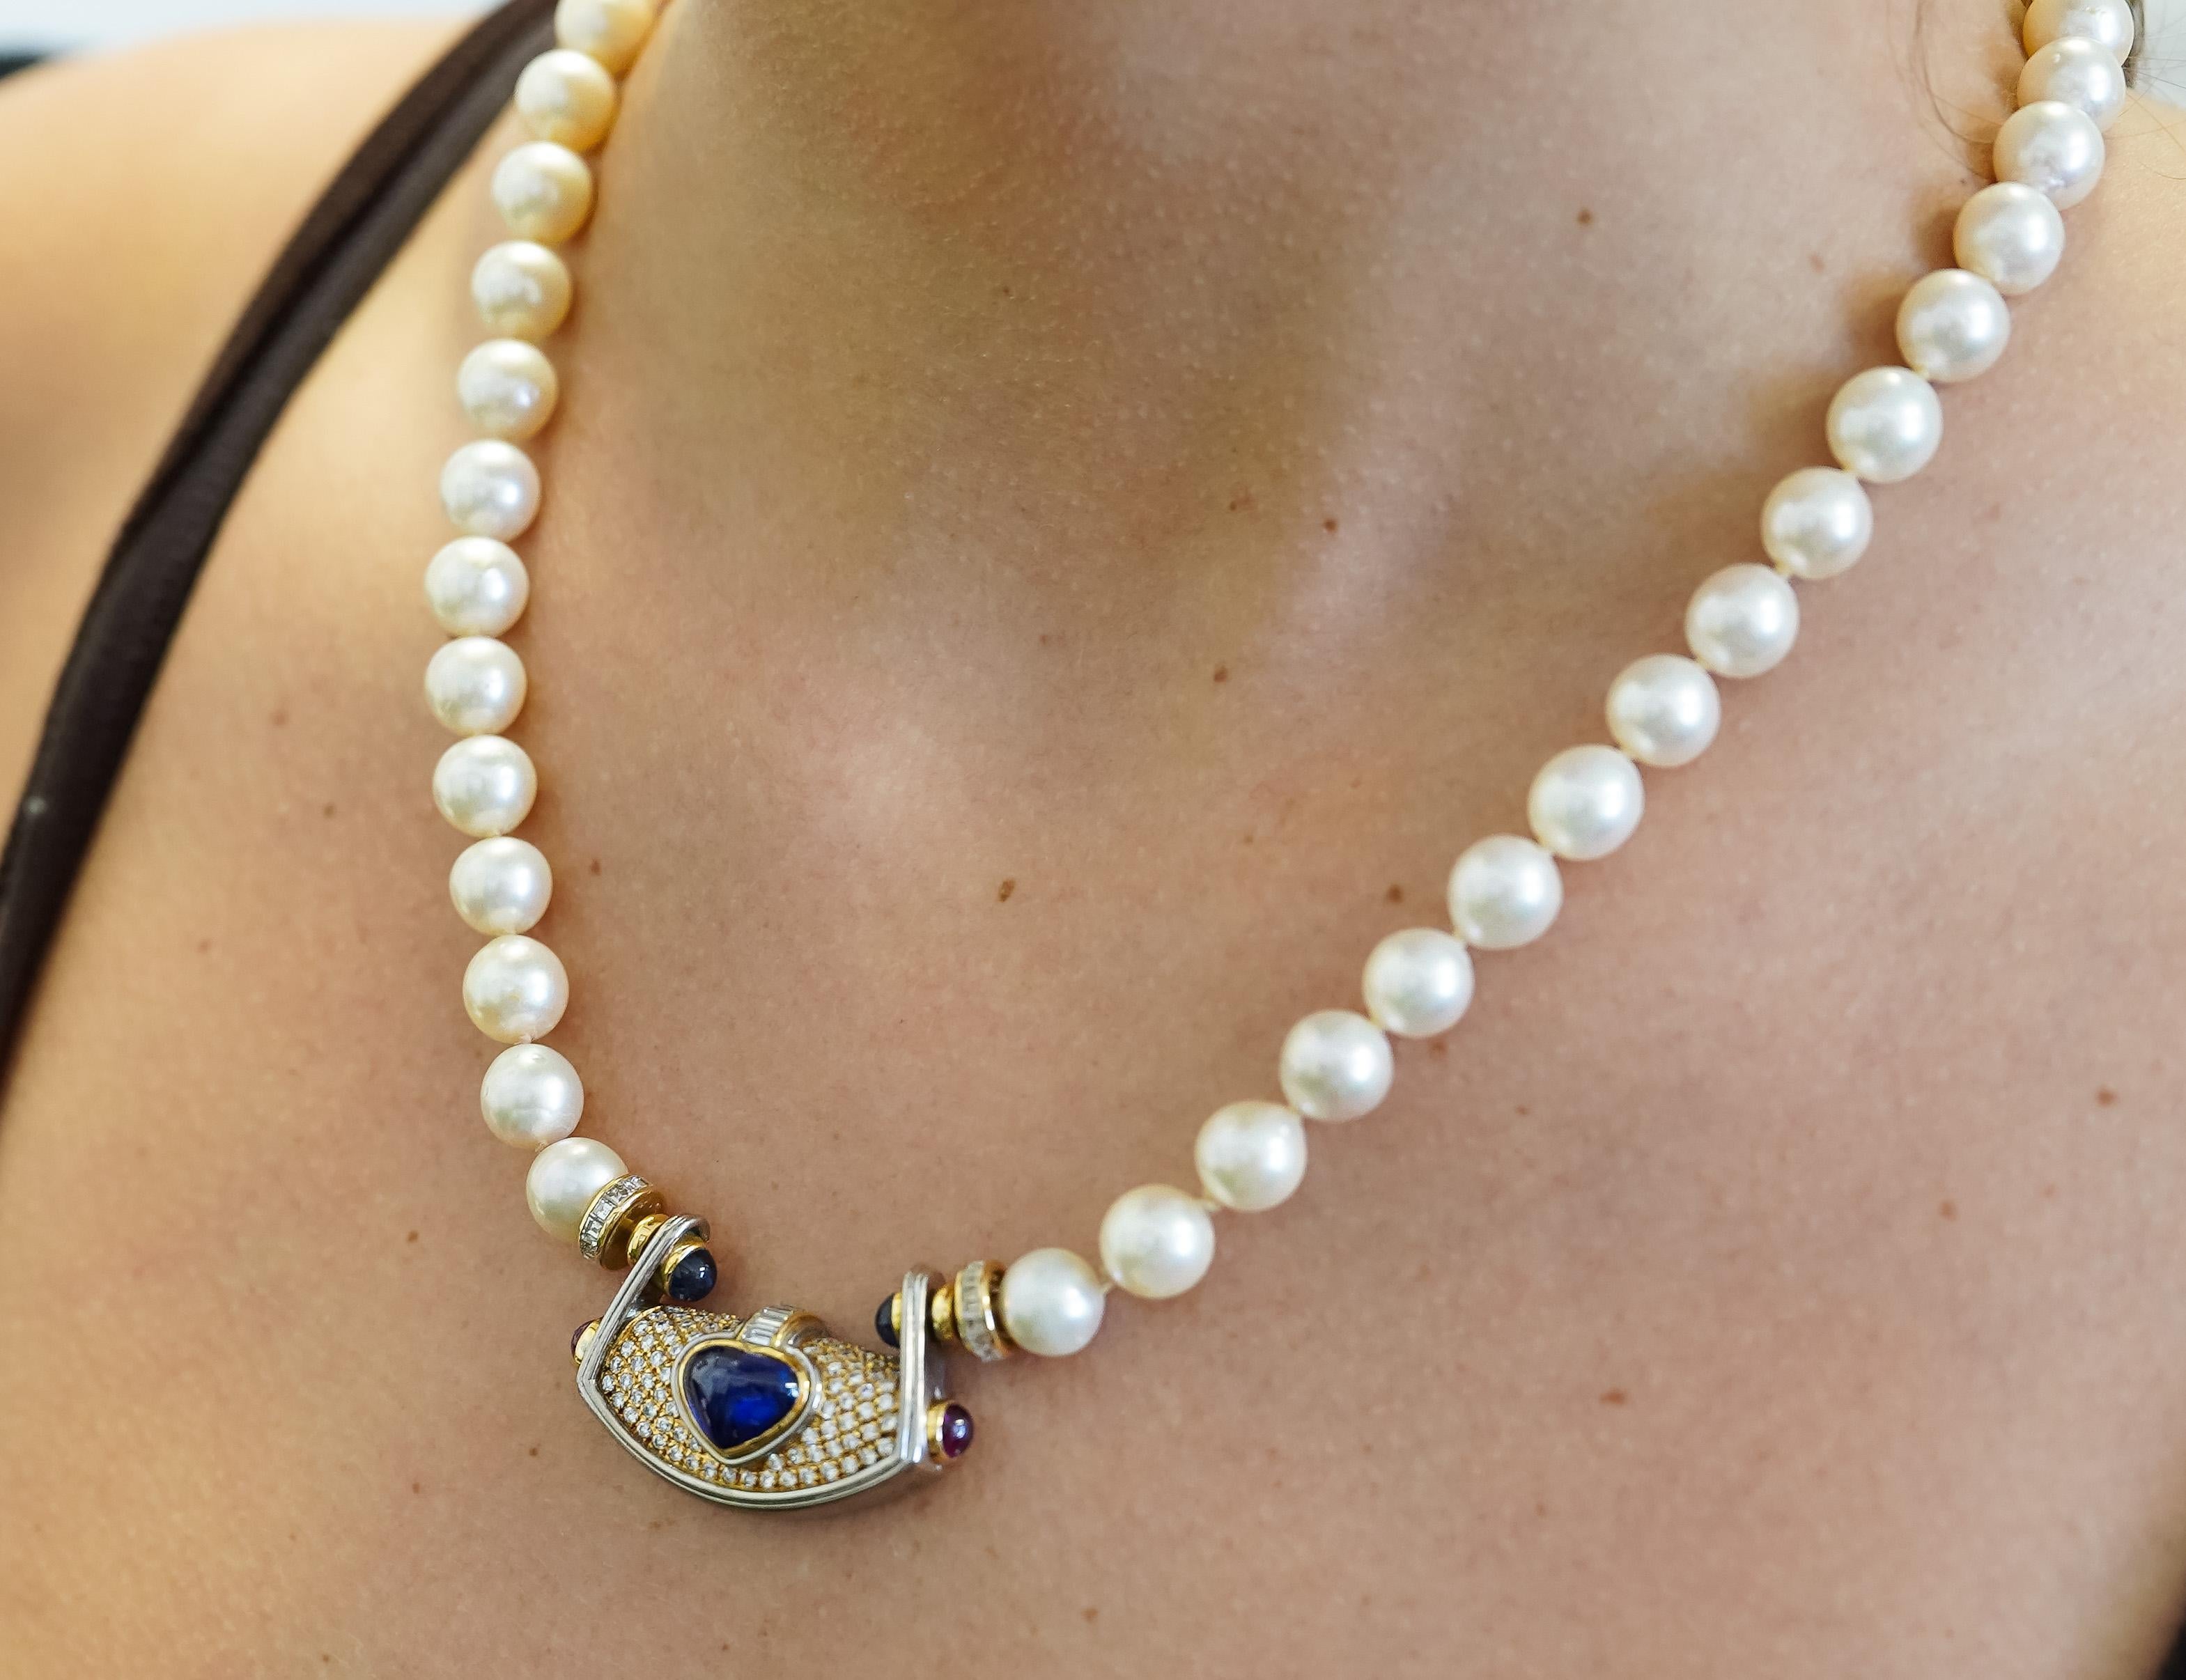 Baroque Vintage GIA Certified 5 Carat Heart Blue Sapphire, Diamond & Pearl Necklace For Sale